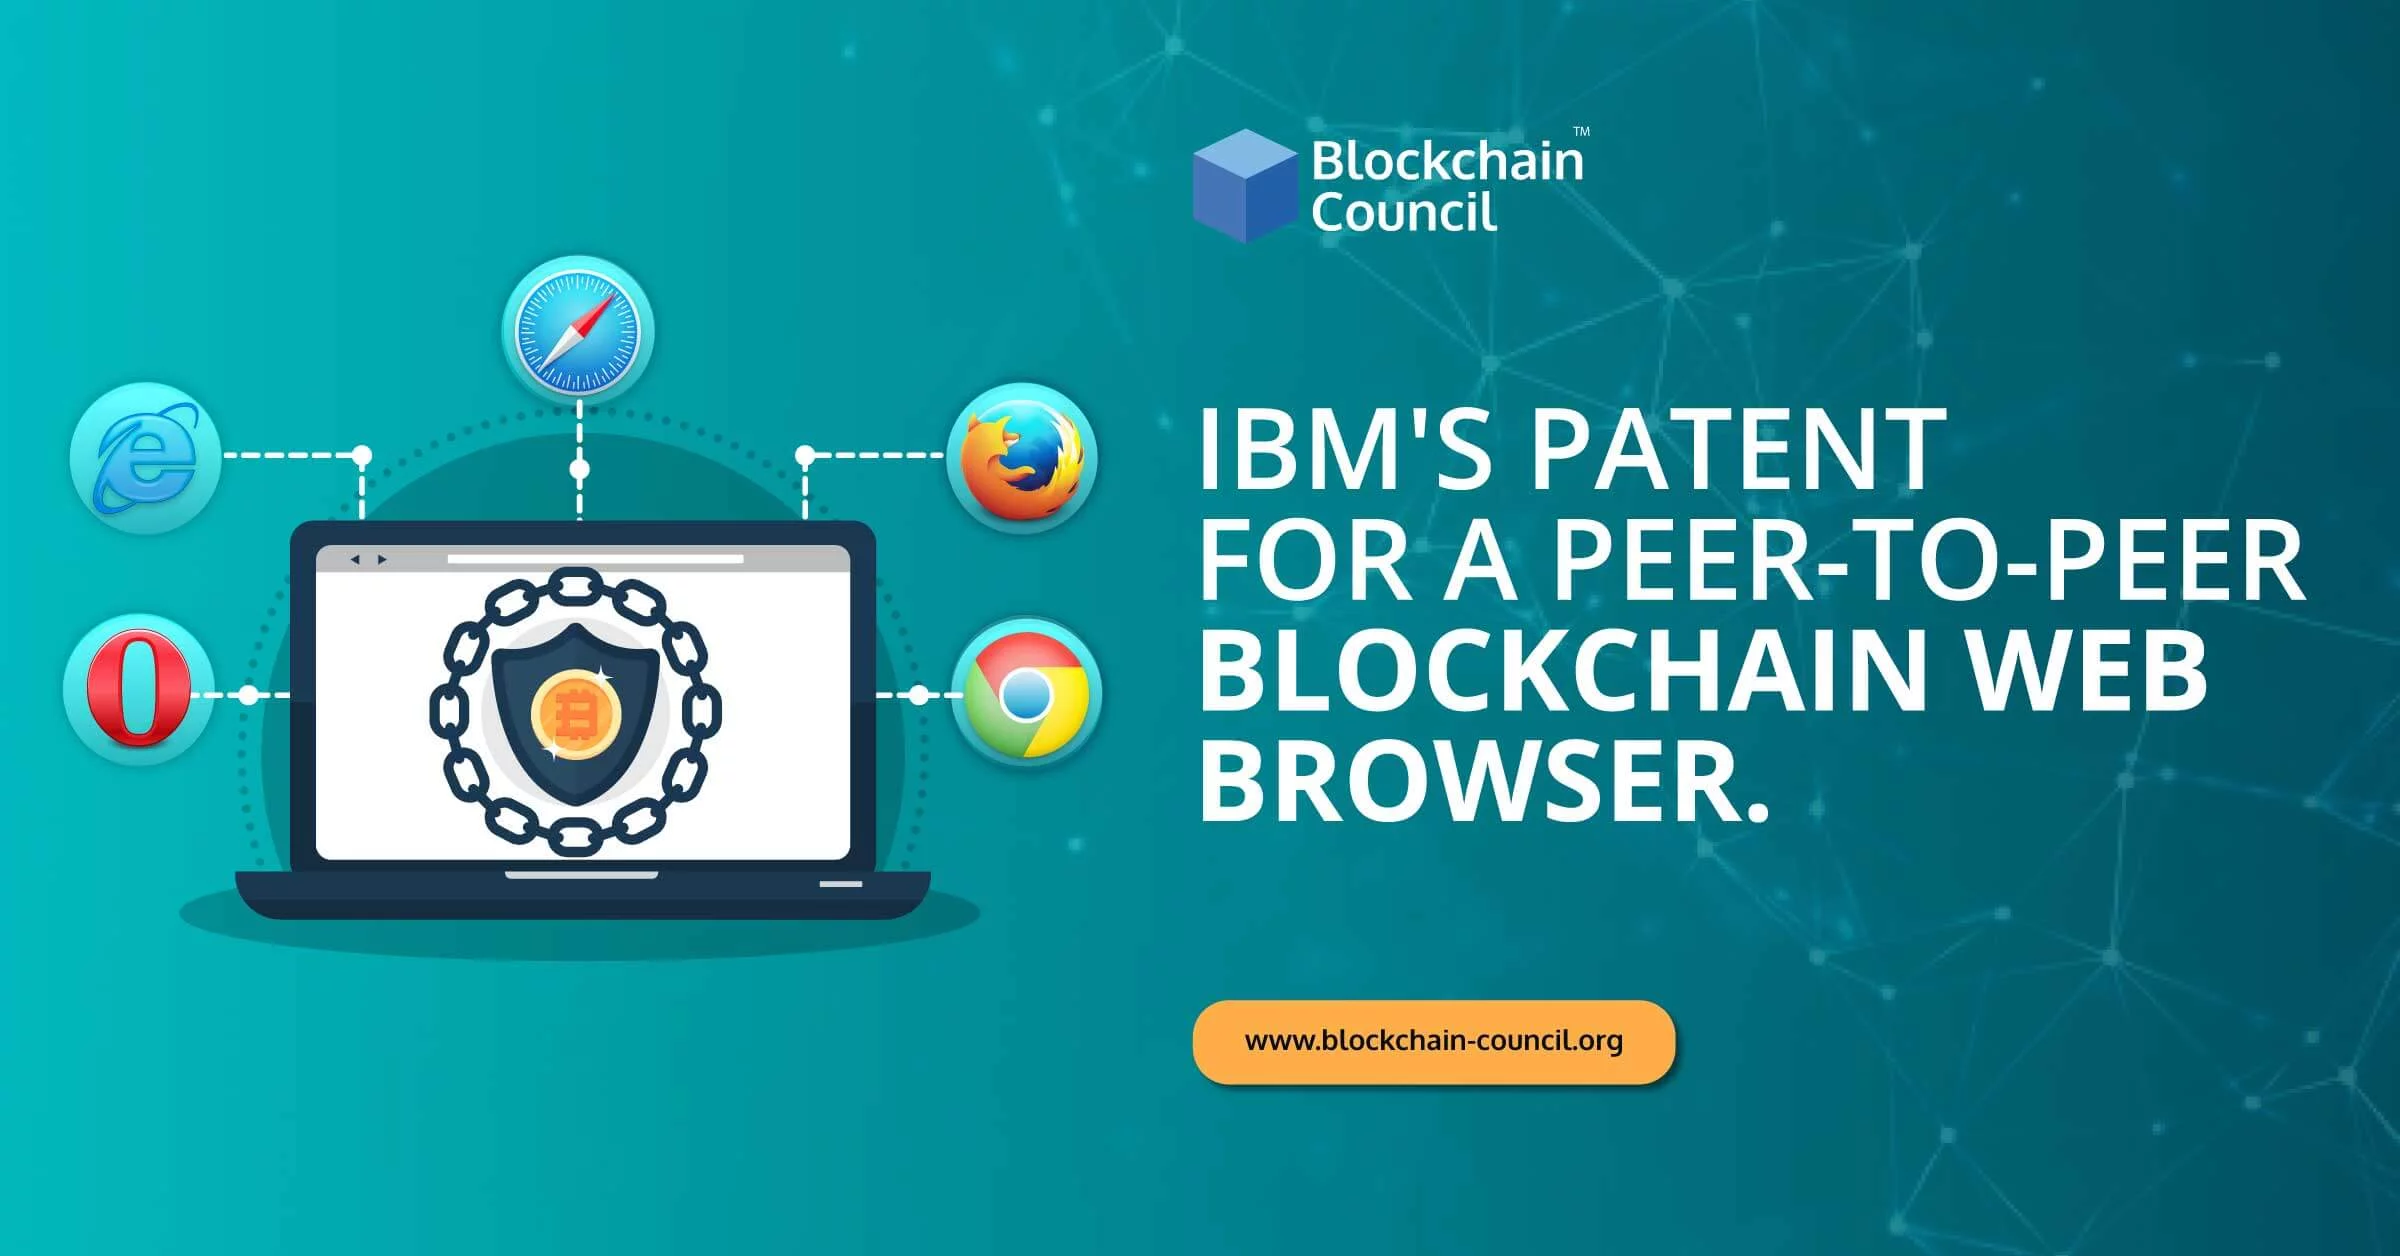 IBM's-Patent-for-a-Peer-to-Peer-Blockchain-Web-Browser